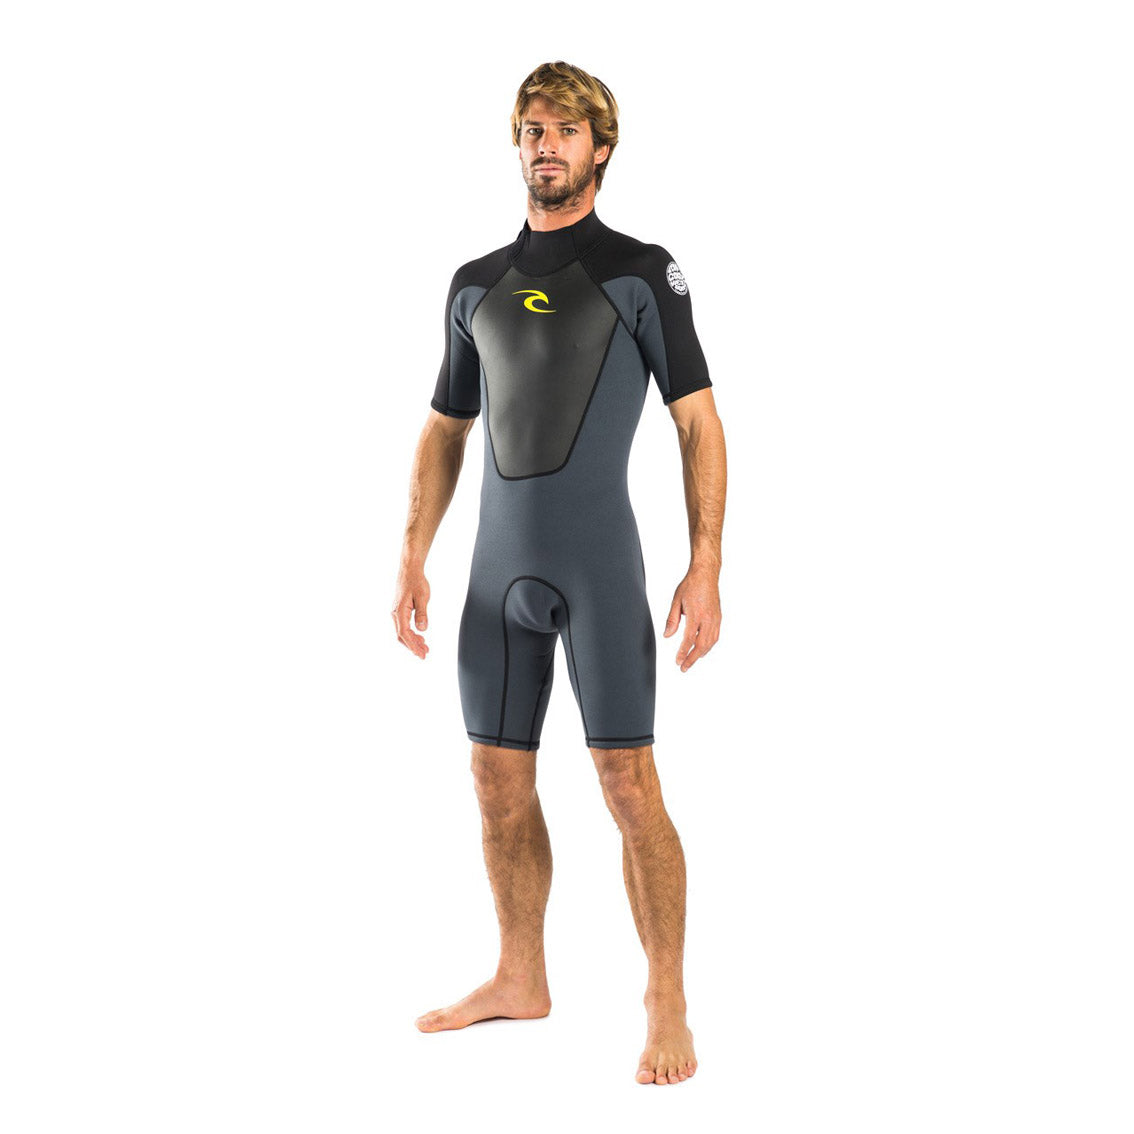 RIP CURL OMEGA 1.5 CHARCOAL summer wetsuit